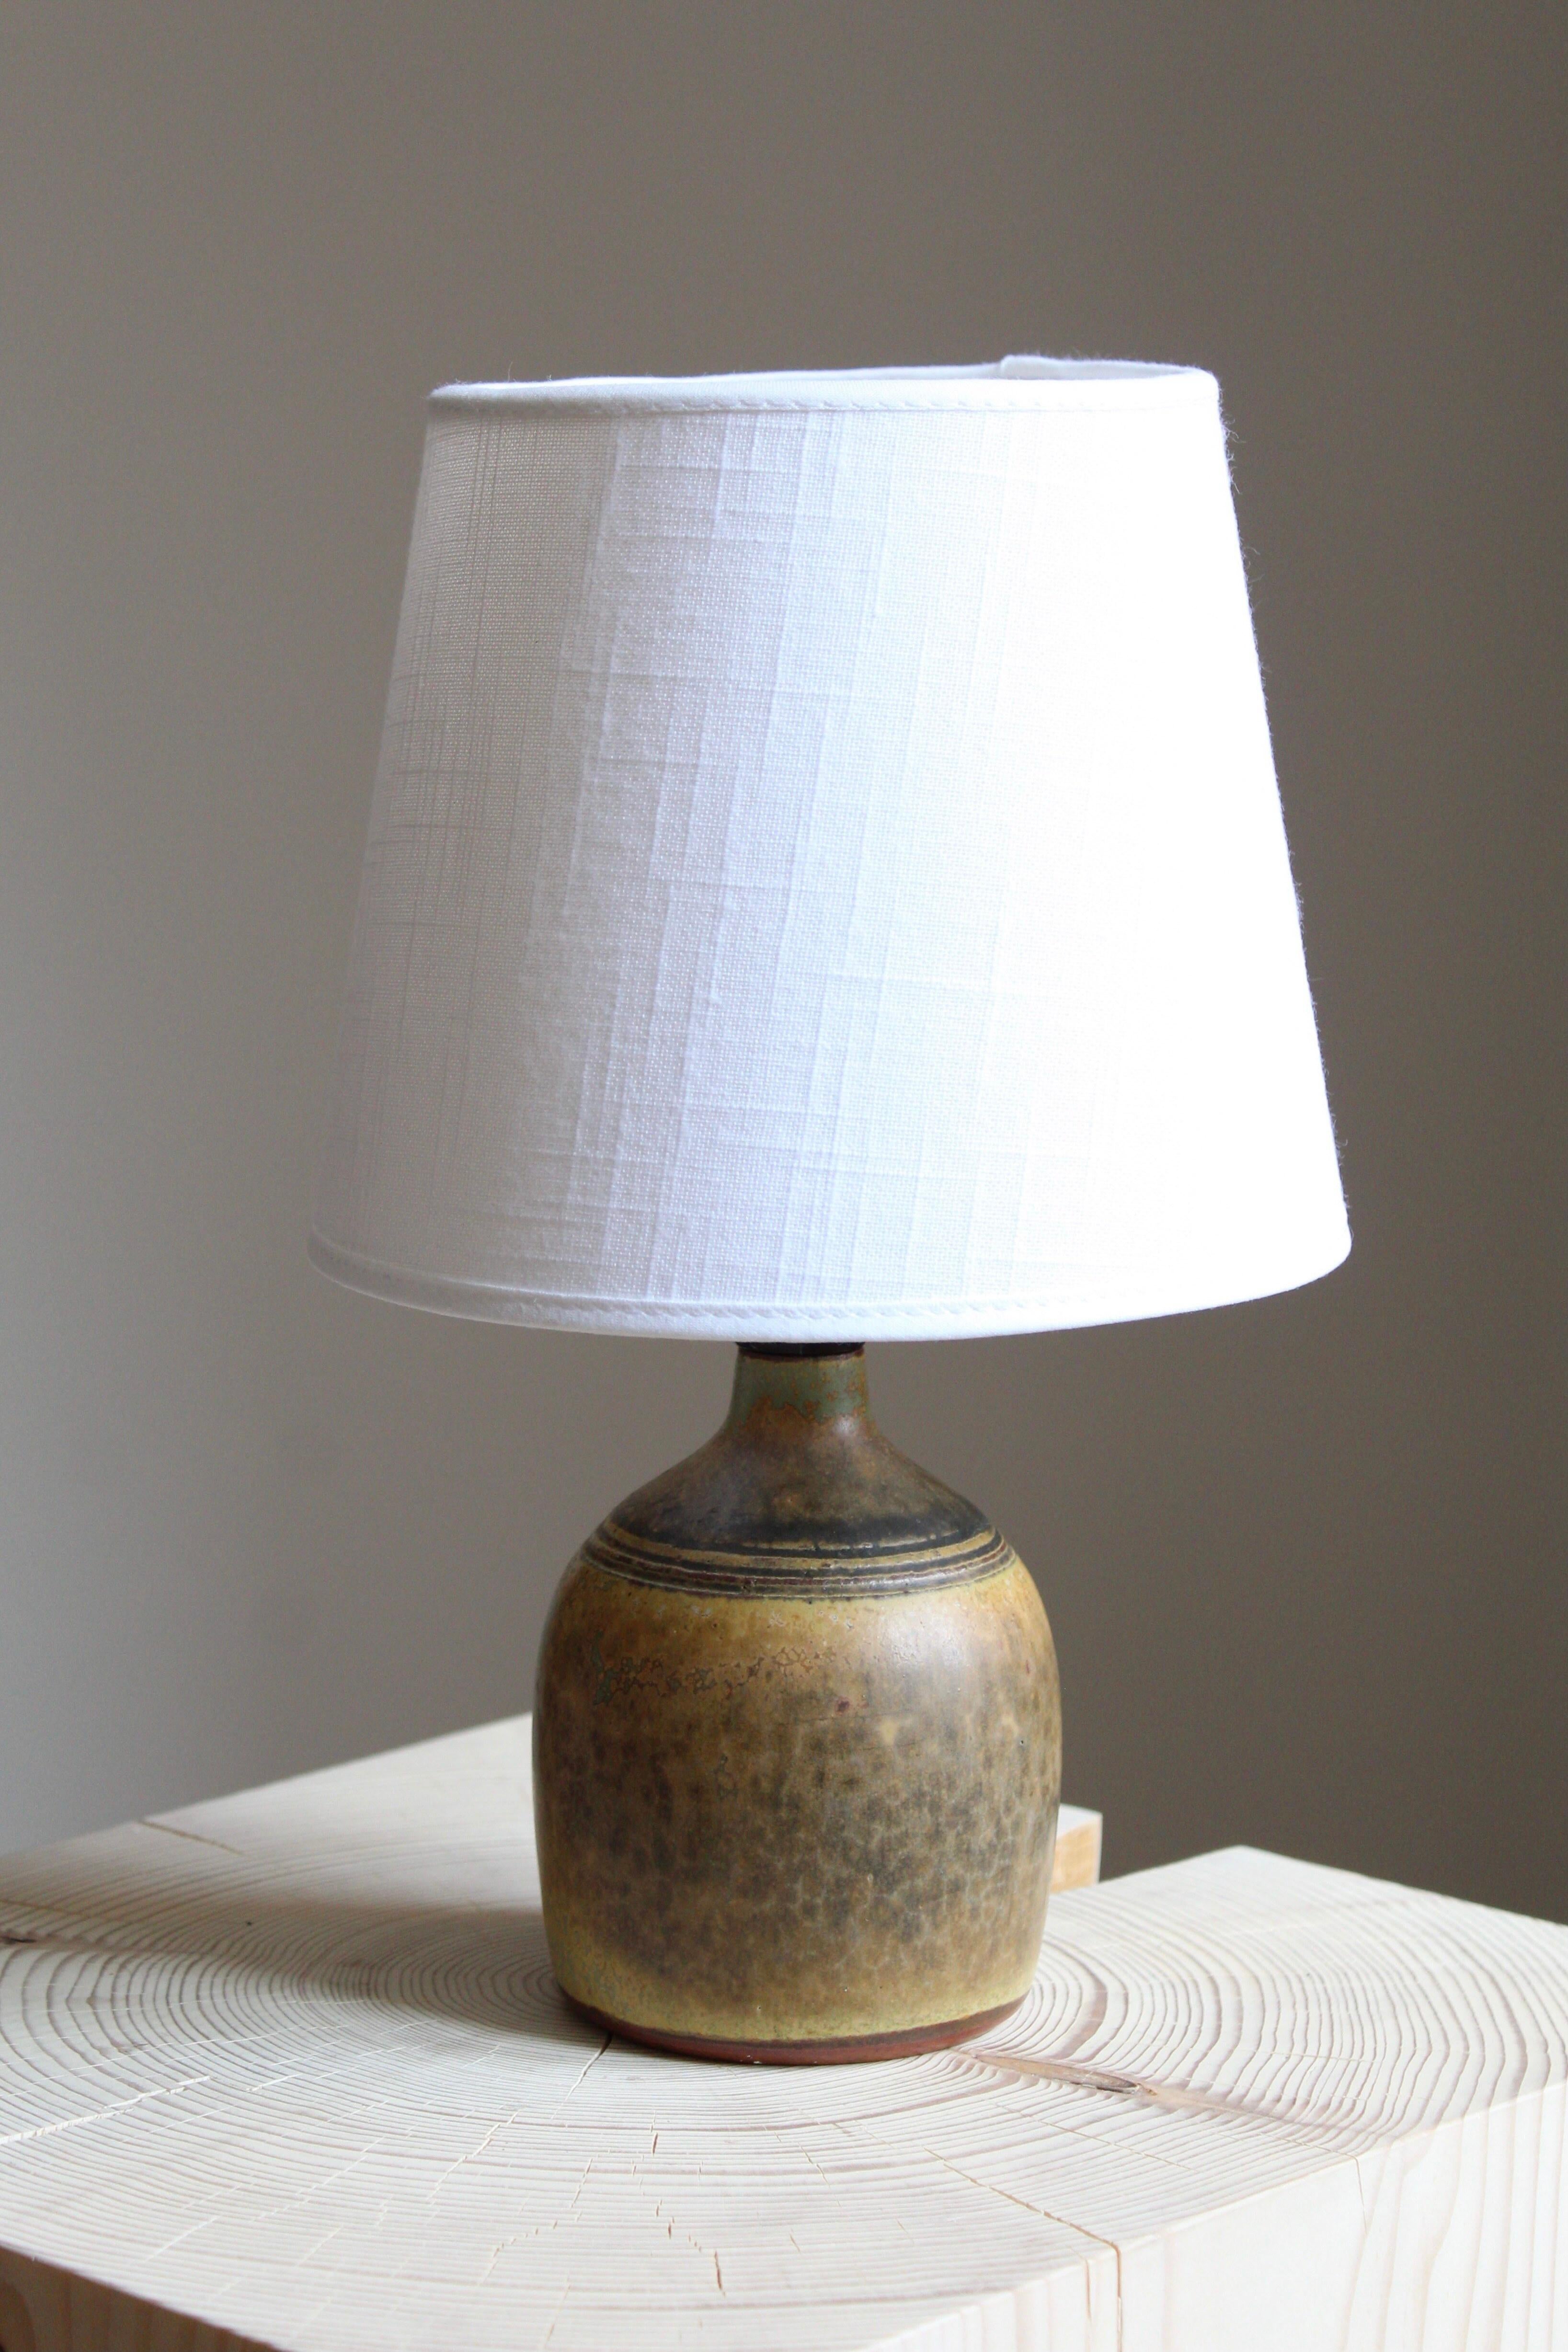 A small table lamp. Produced and designed by Rolf Palm, Sweden, dated 1962.

In glazed stoneware. Shade not included.